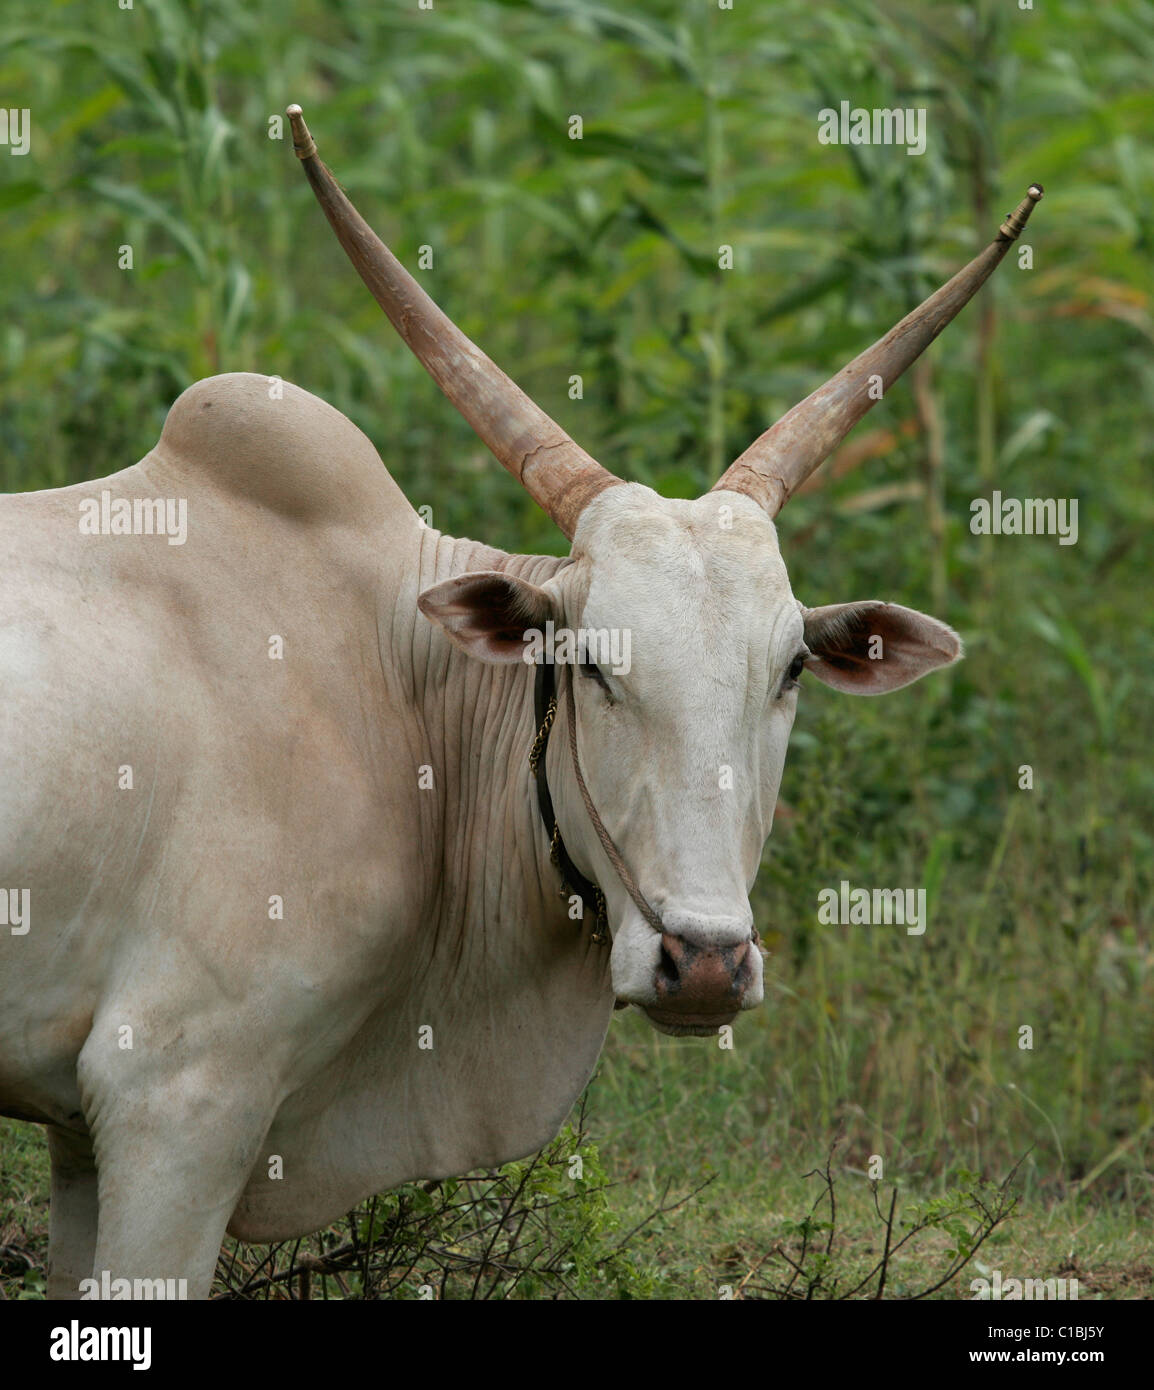 ox oxen India plow animal horns brass tipped horns Stock Photo